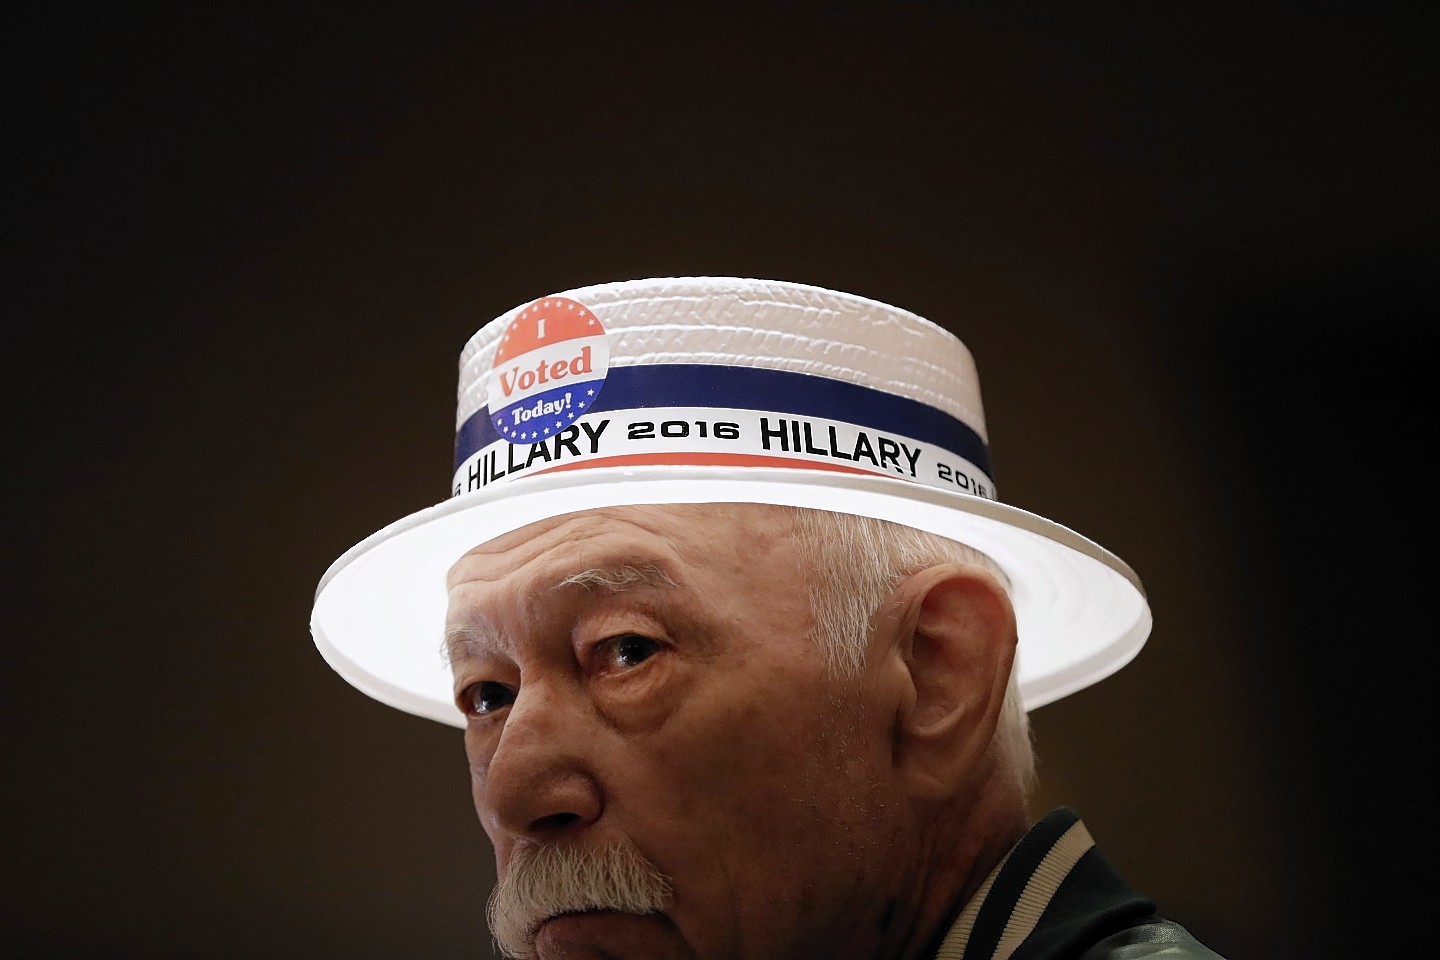 Julio Jacot wears a hat in support of Democratic presidential candidate Hillary Clinton at an election night watch party Tuesday, Nov. 8, 2016, in St. Louis. (AP Photo/Jeff Roberson)